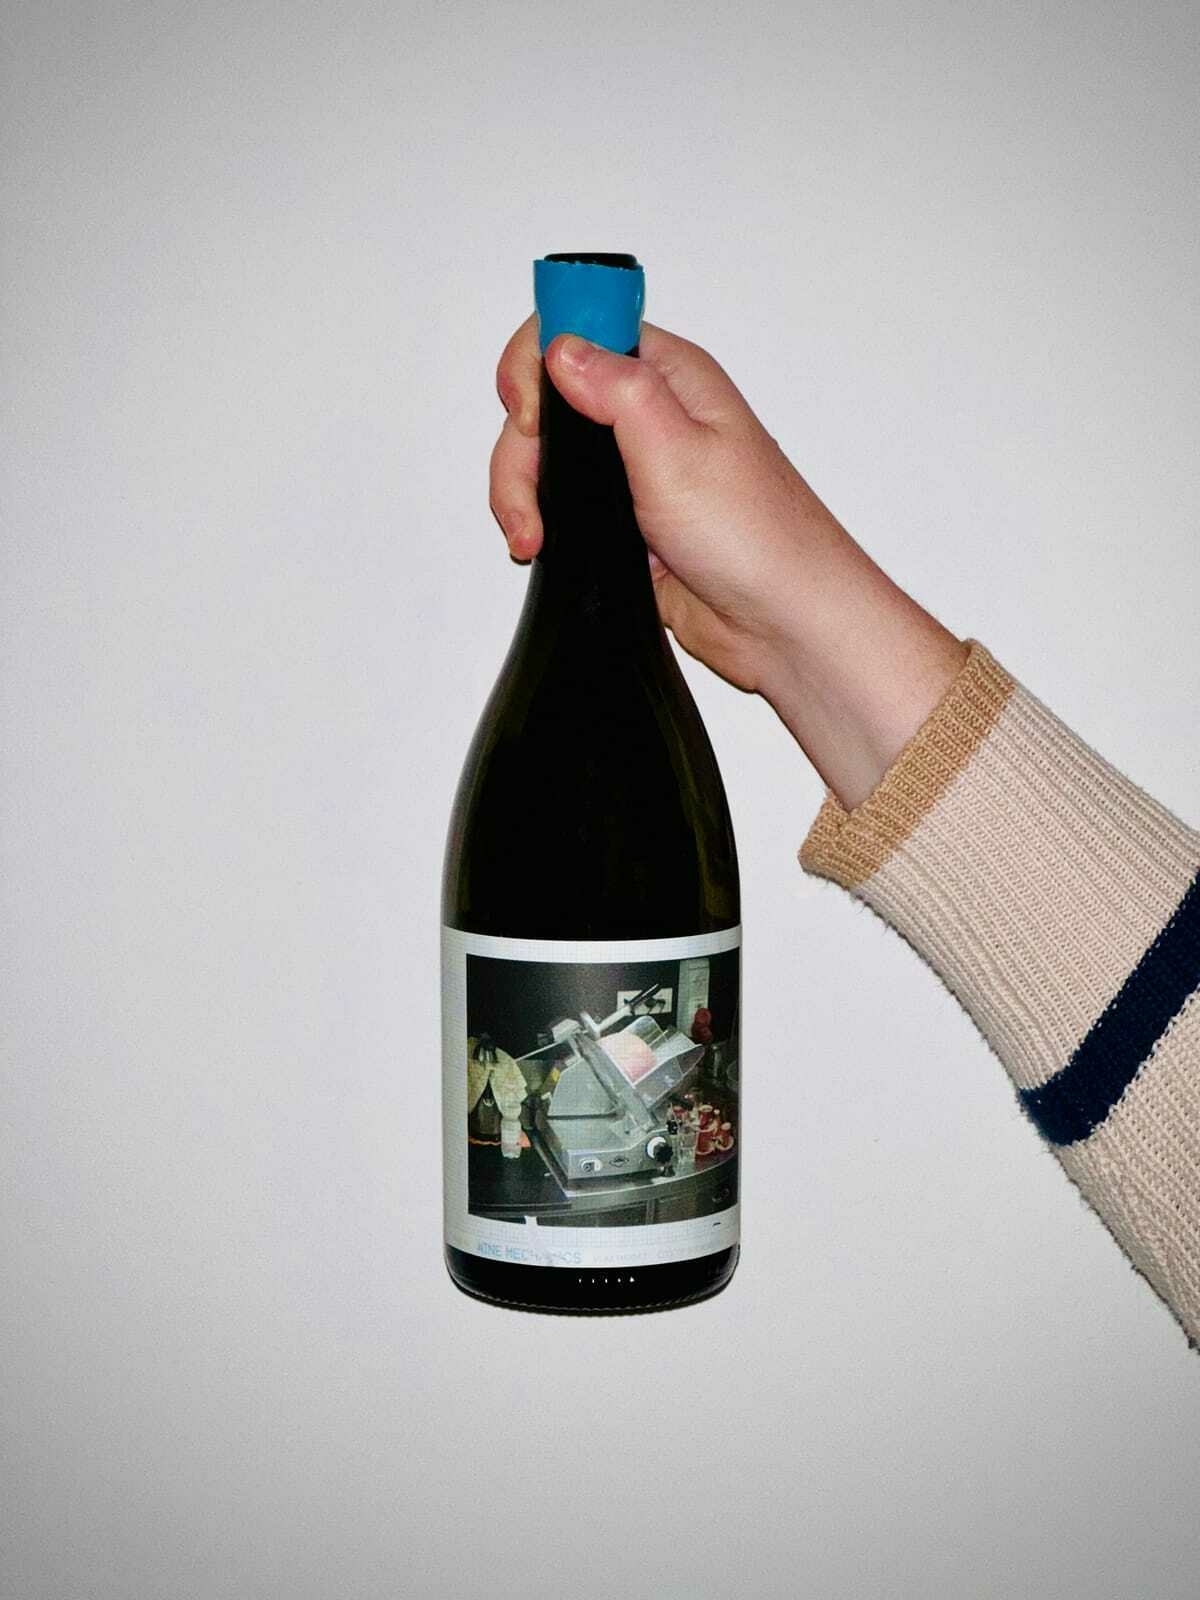 A wine bottle held up against a white wall. The label shows an illustration of a meat slicer. Wine Mechanics is barely readable.